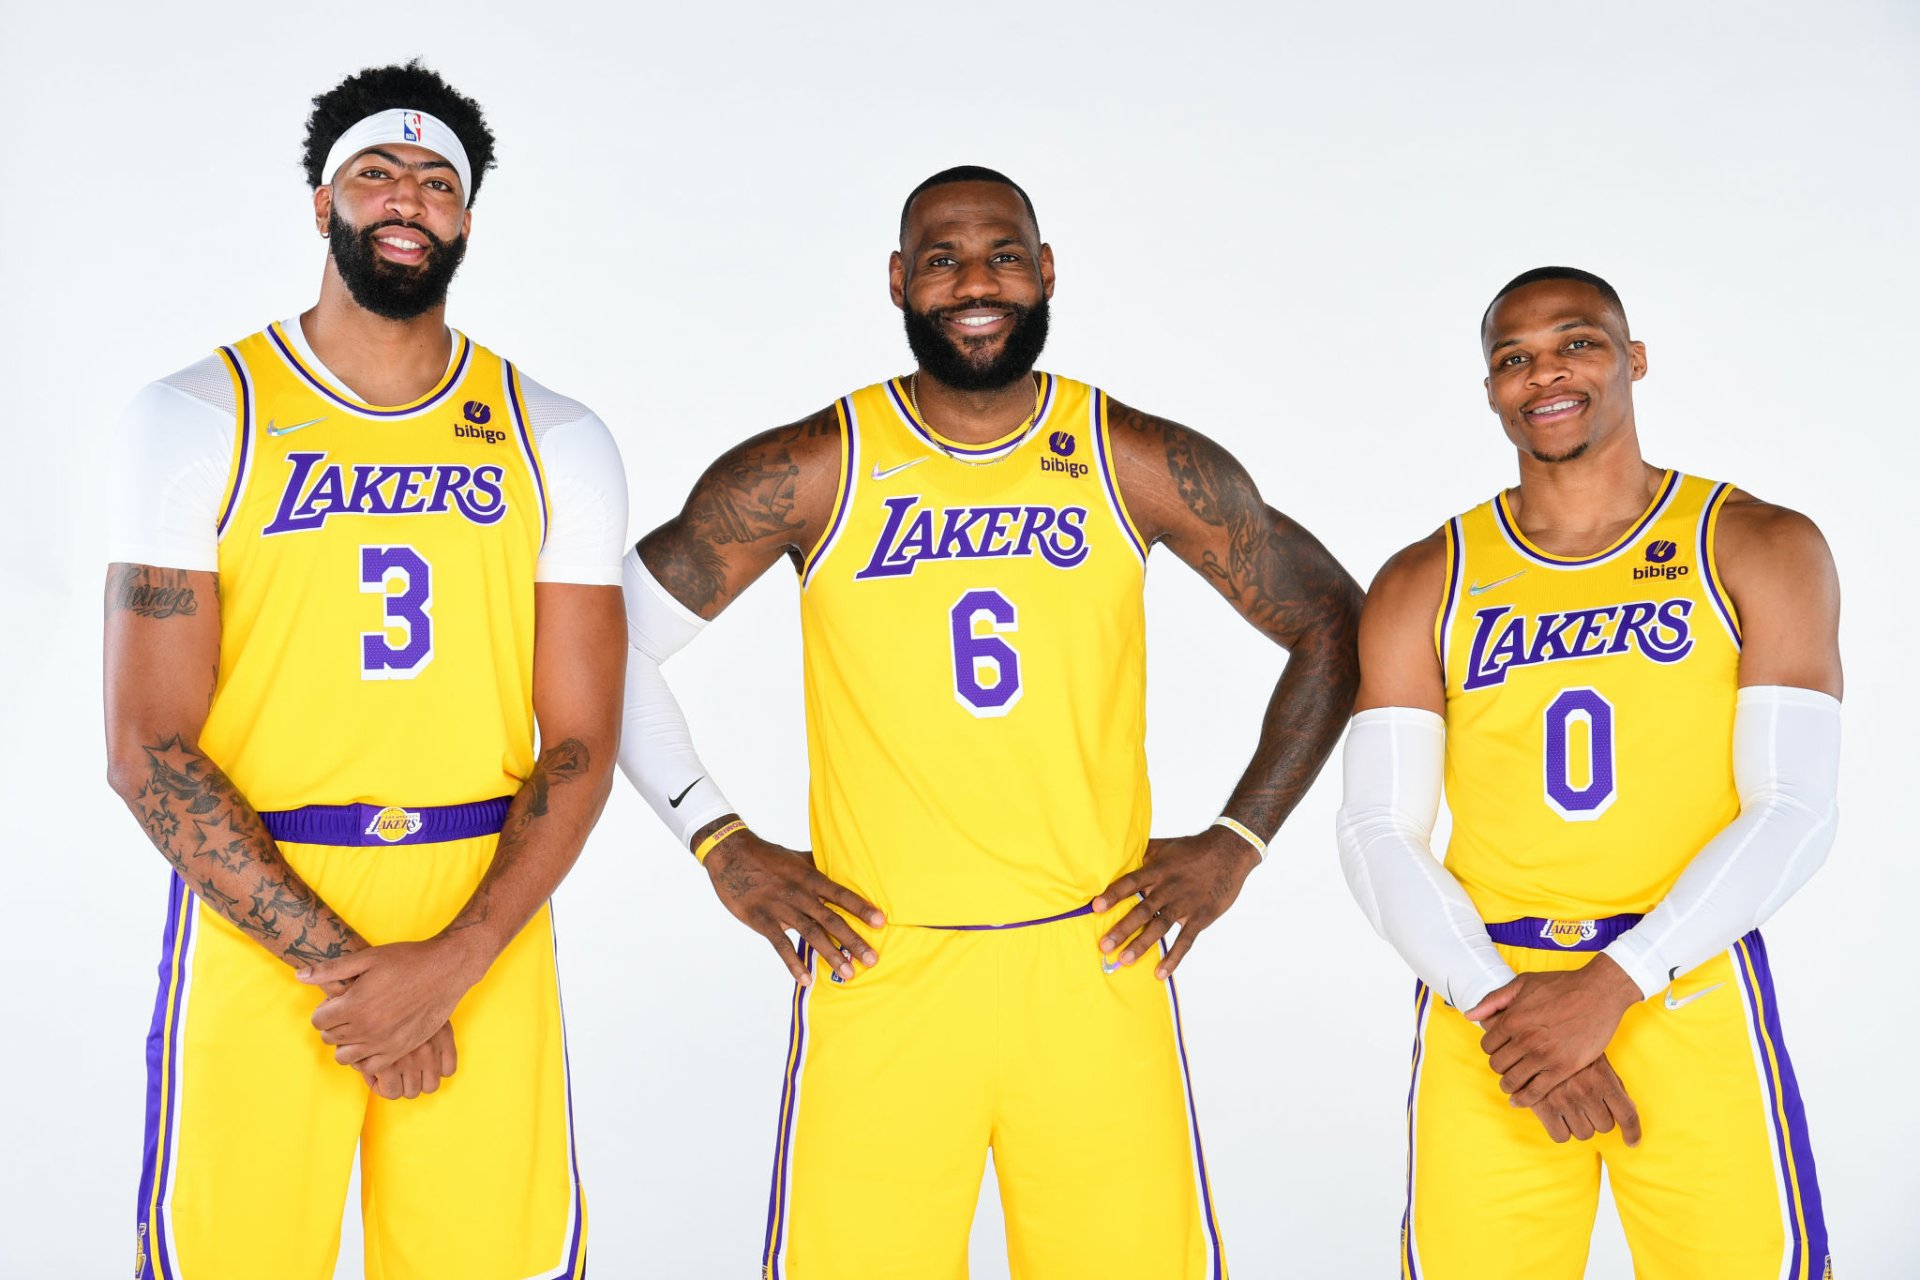 Lakers 2019 Wallpapers